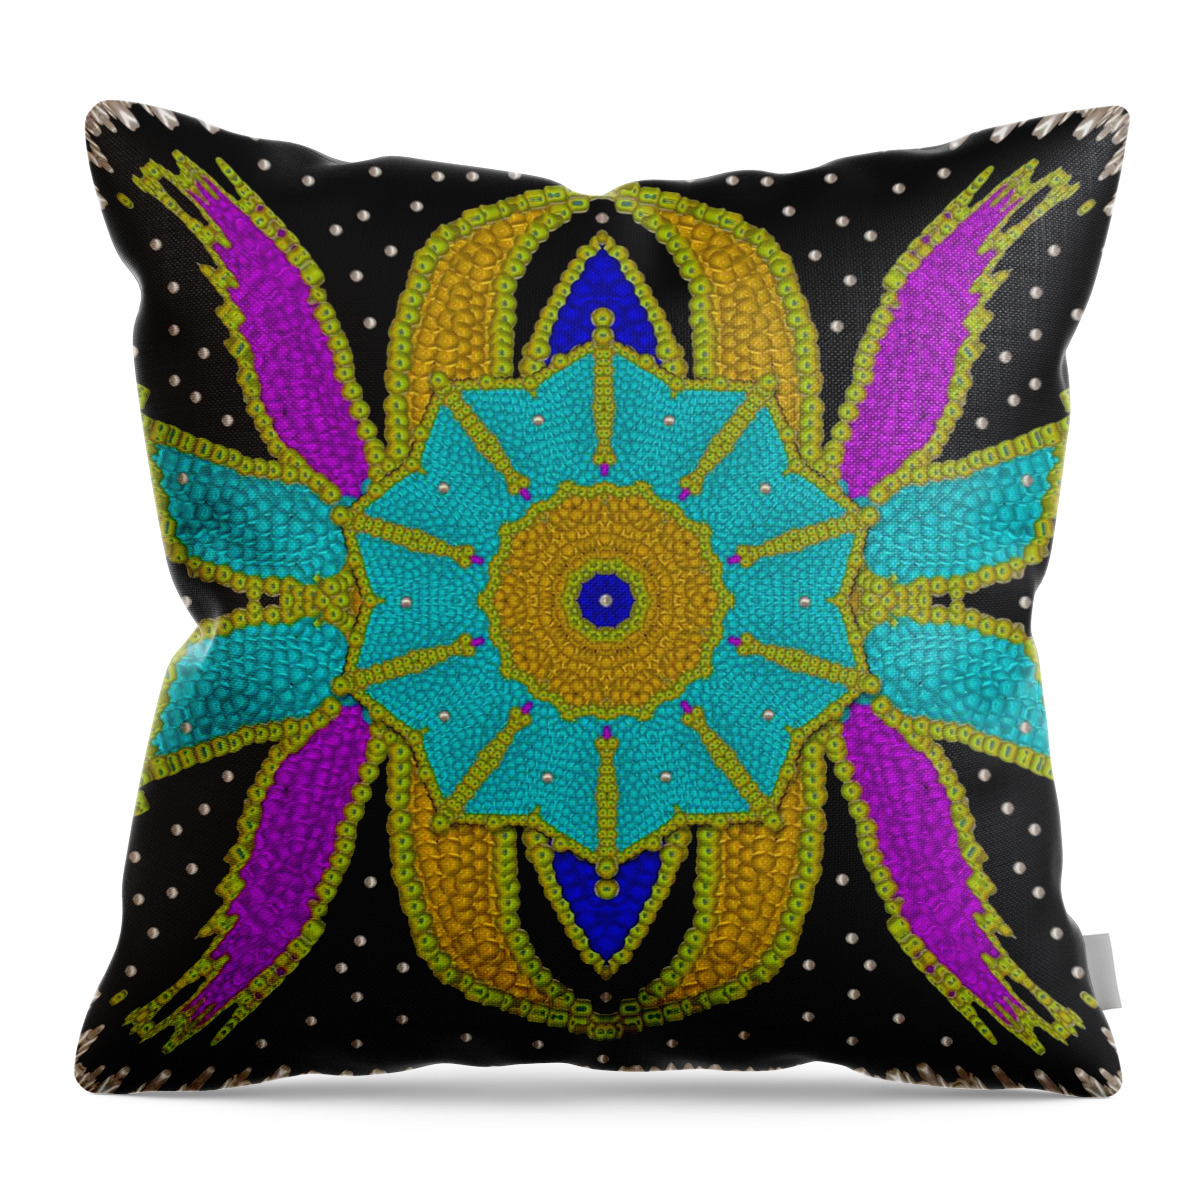 Space Throw Pillow featuring the mixed media Gothic Night In Rainbow dark sky by Pepita Selles